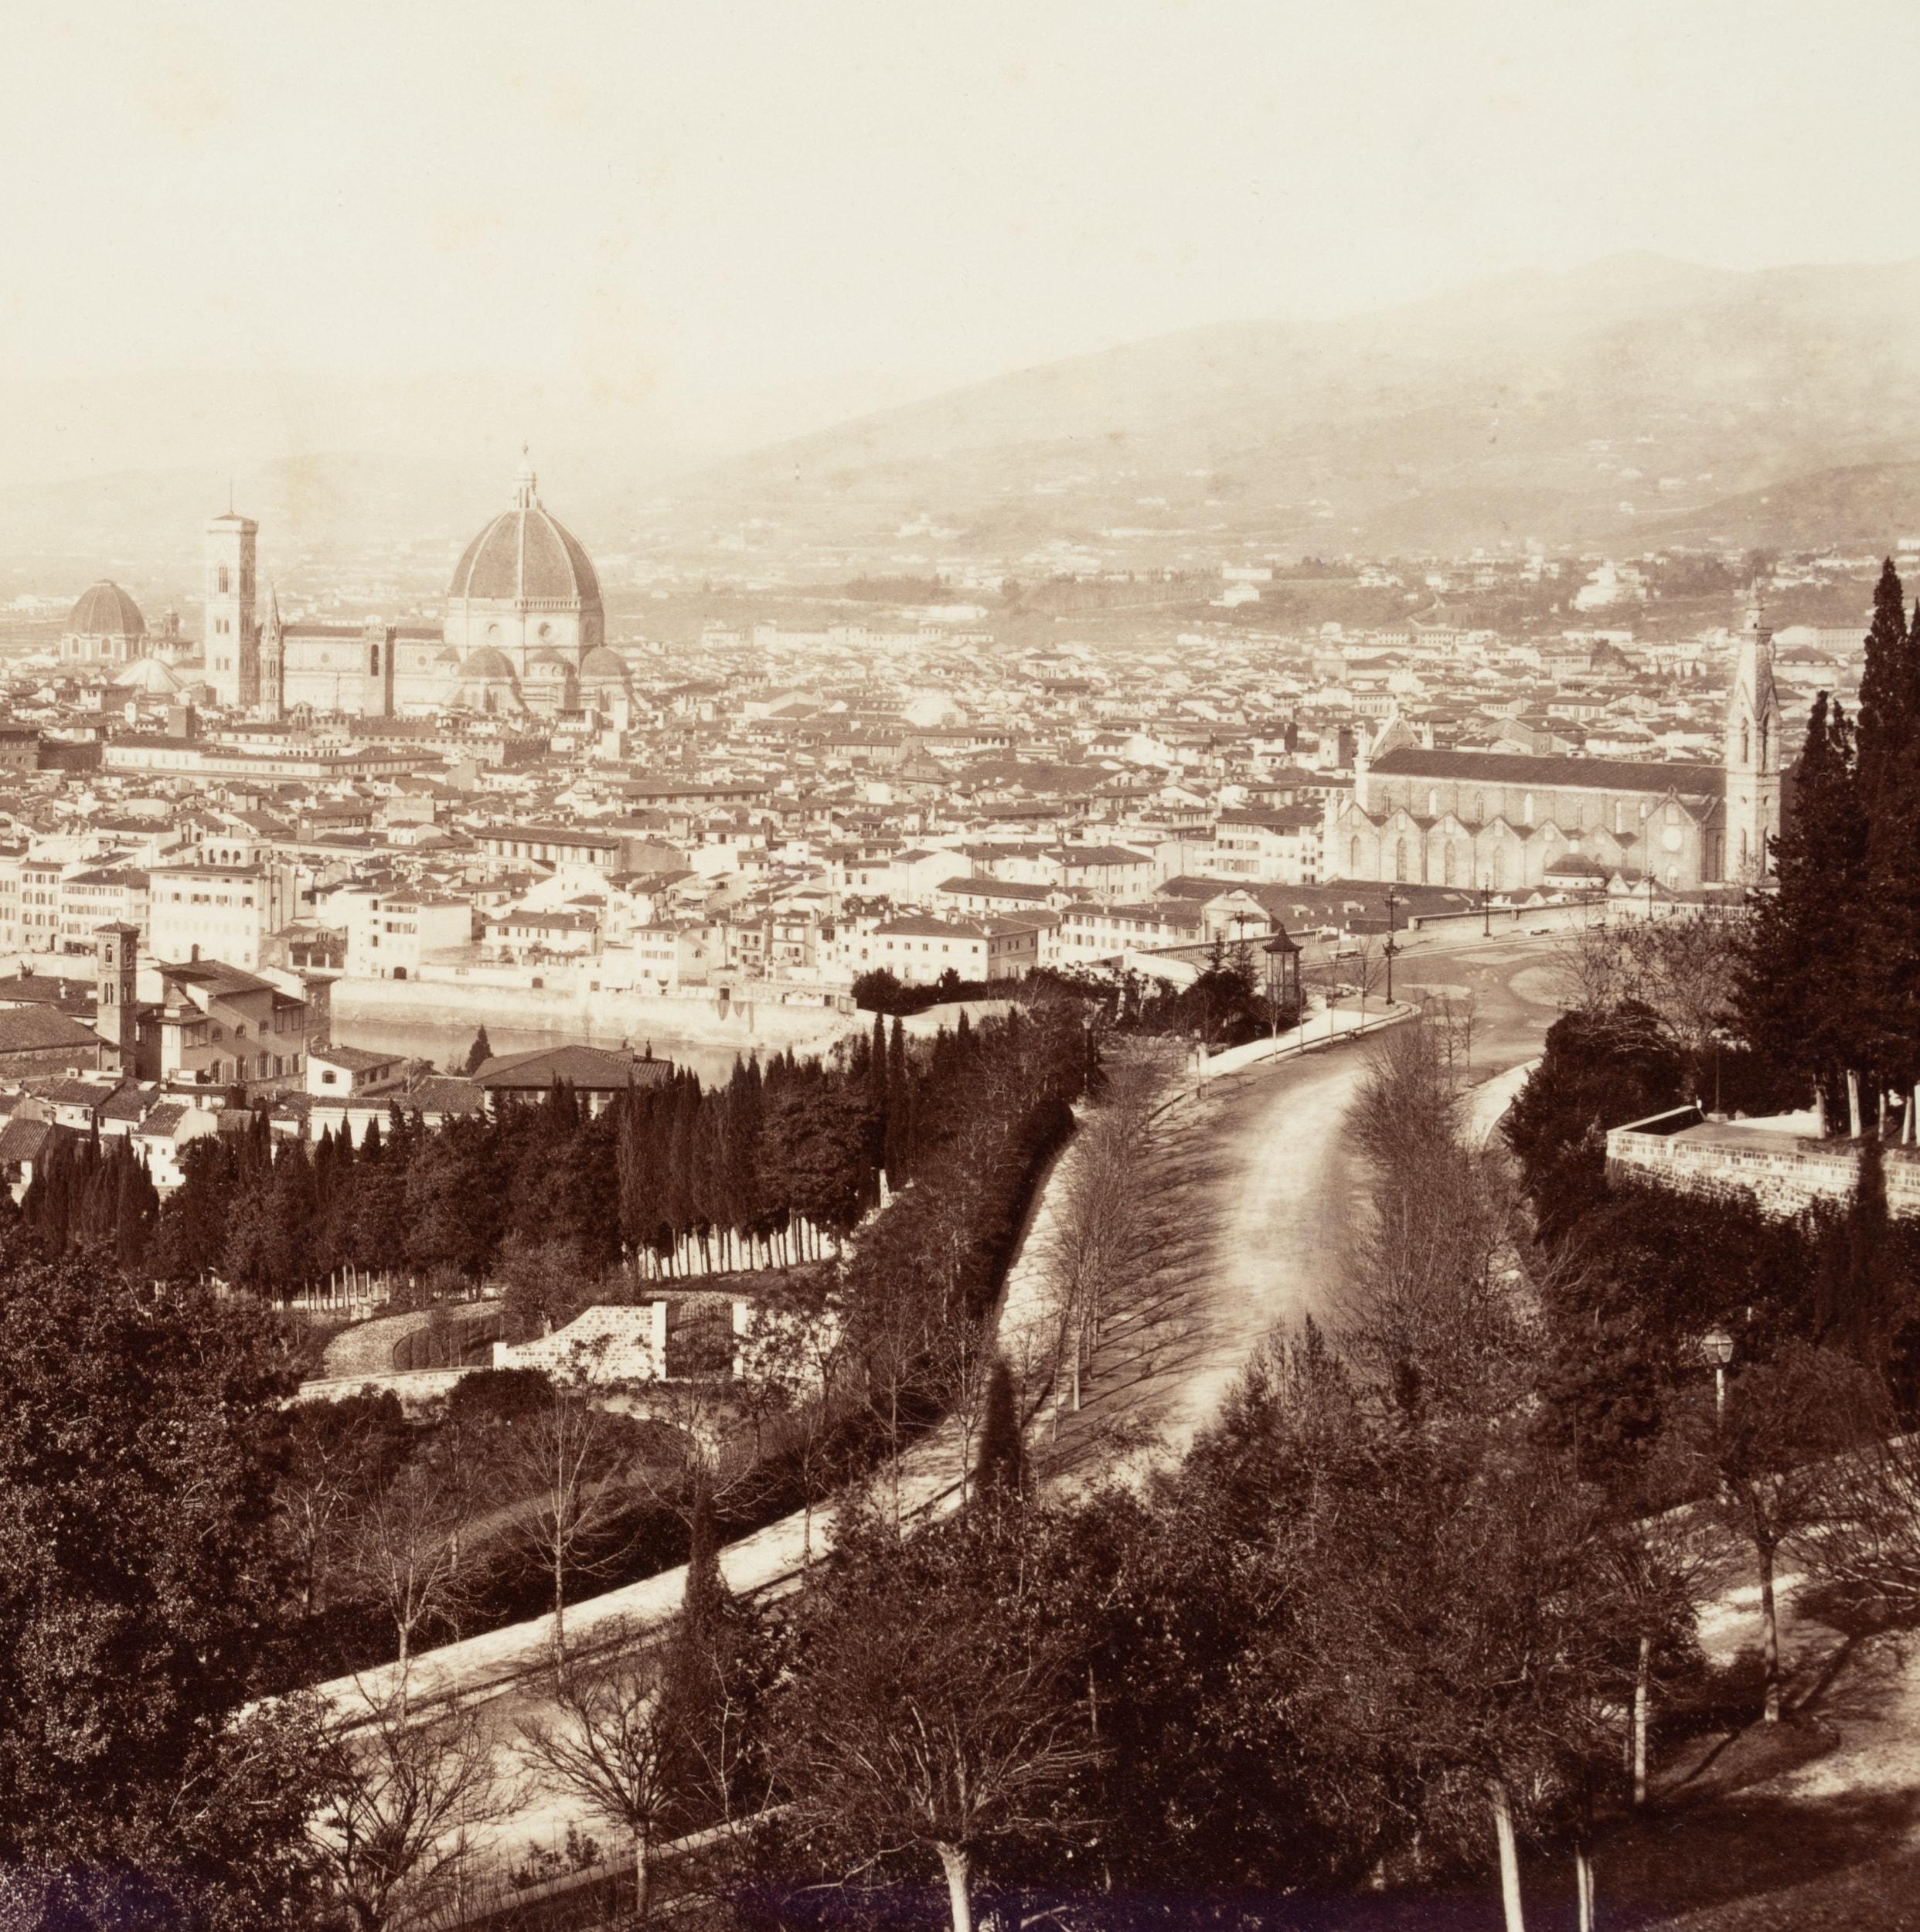 Fratelli Alinari (19th century): City view of Florence Panoramic view over the city, c. 1880, albumen paper print

Technique: albumen paper print, mounted on Cardboard

Stamp: Lower right Blank stamp, Fratelli Alinari. Florence. 19th